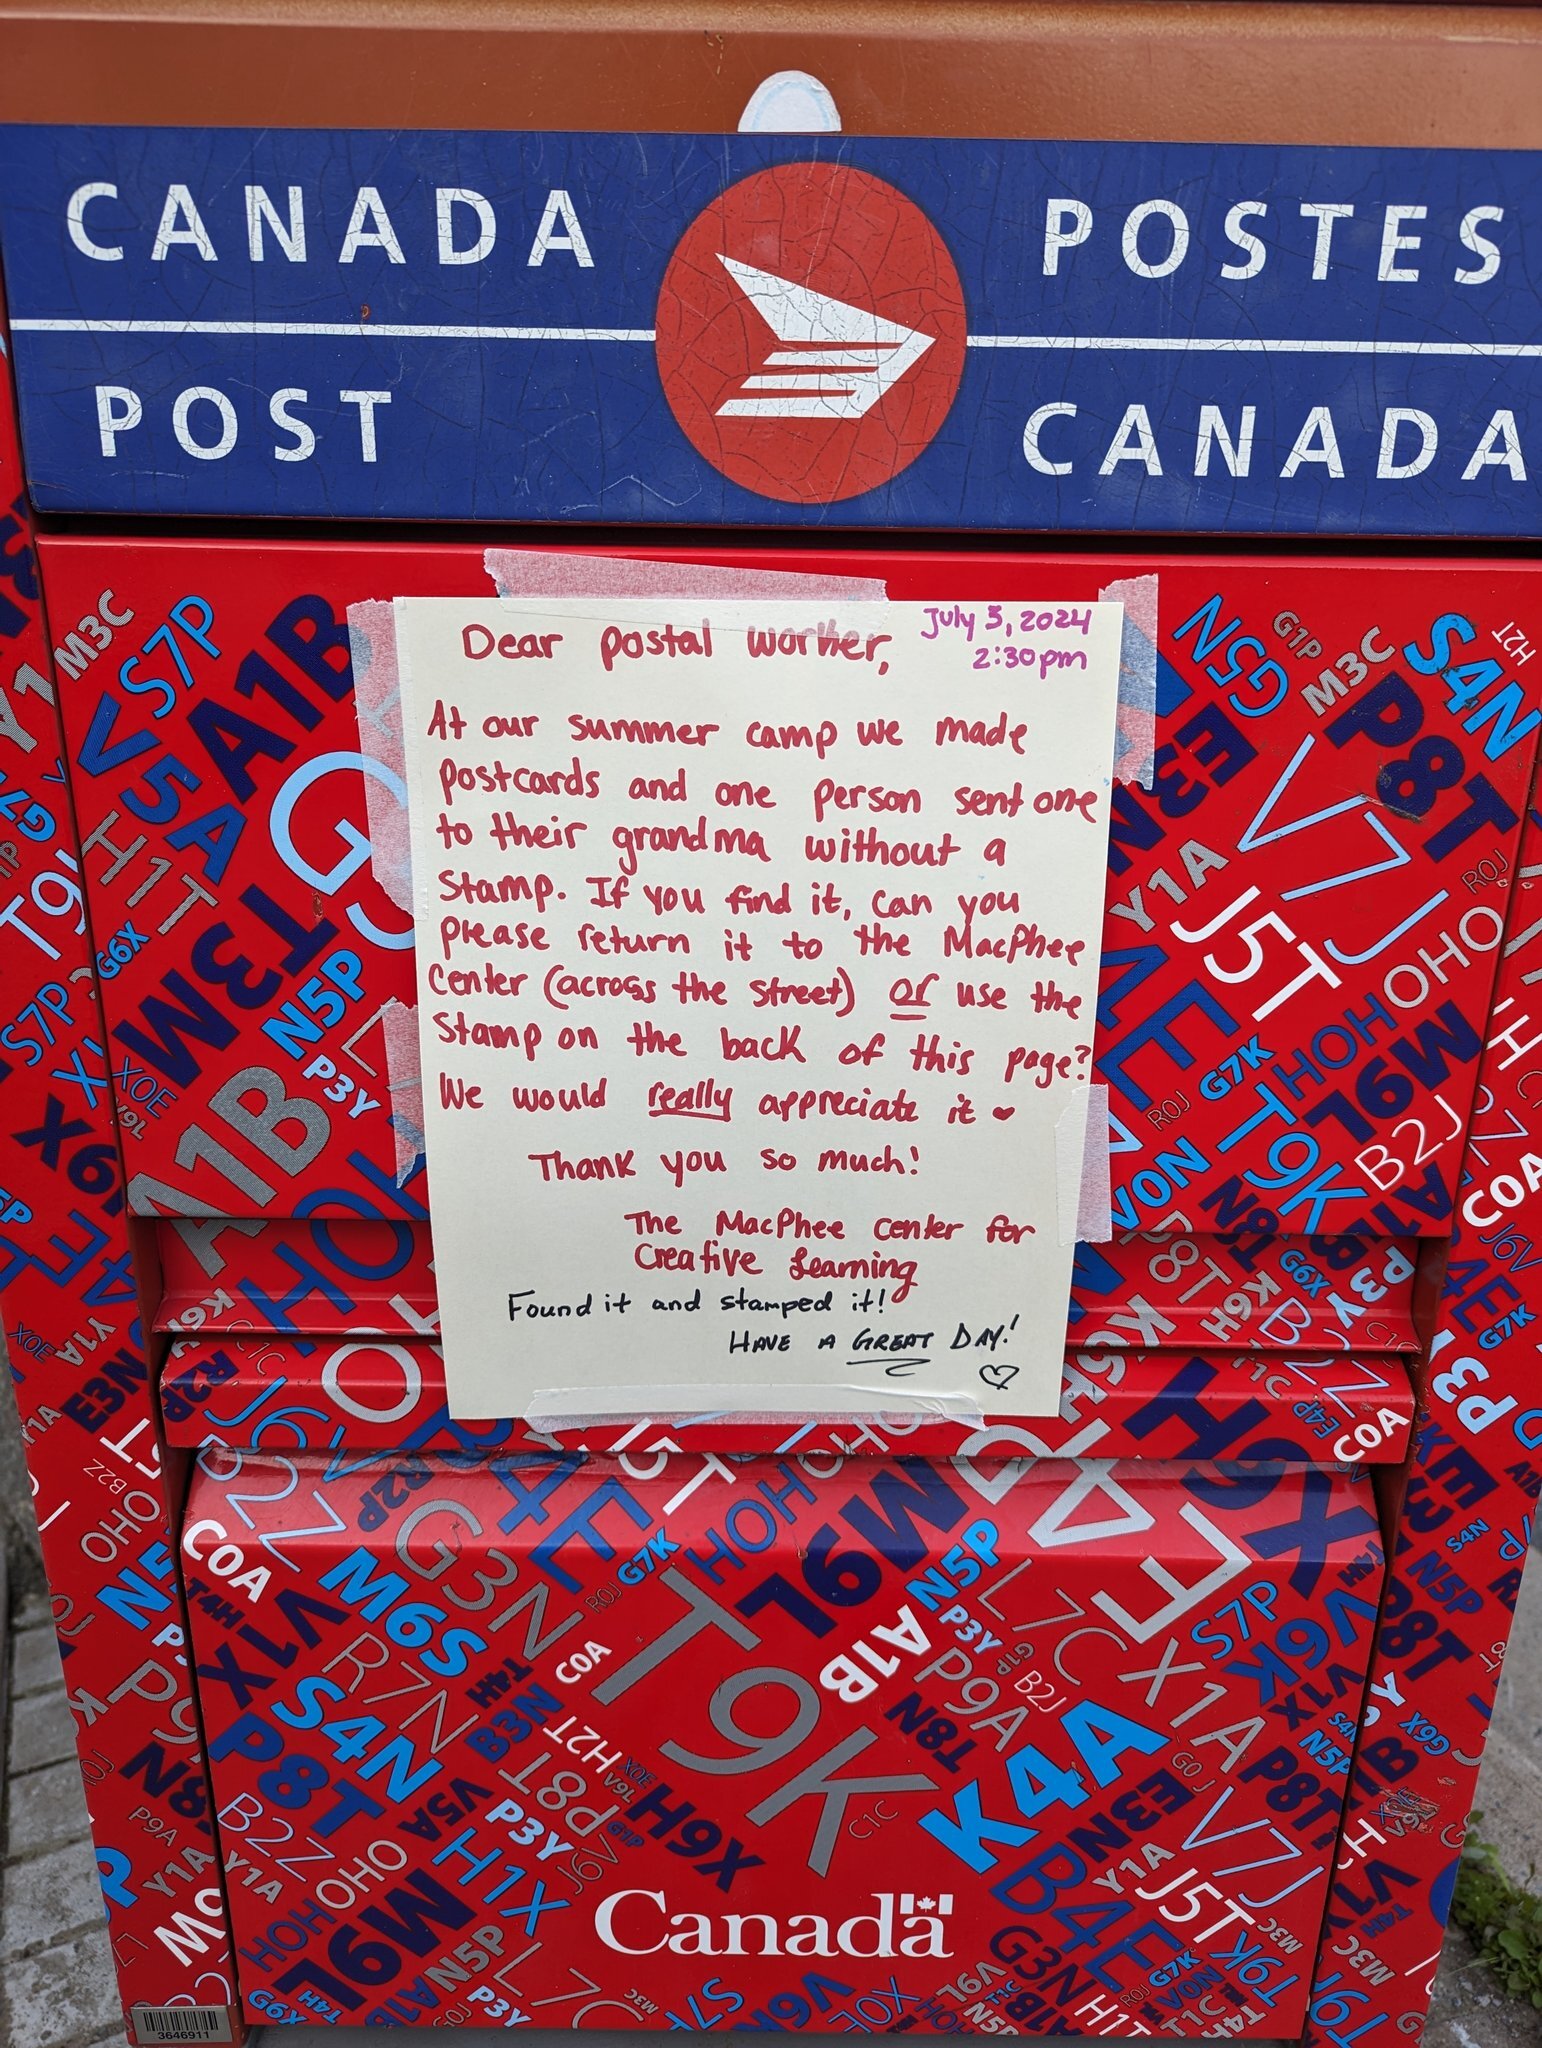 Canada Post worker saves the day after child forgets stamp on postcard to grandma